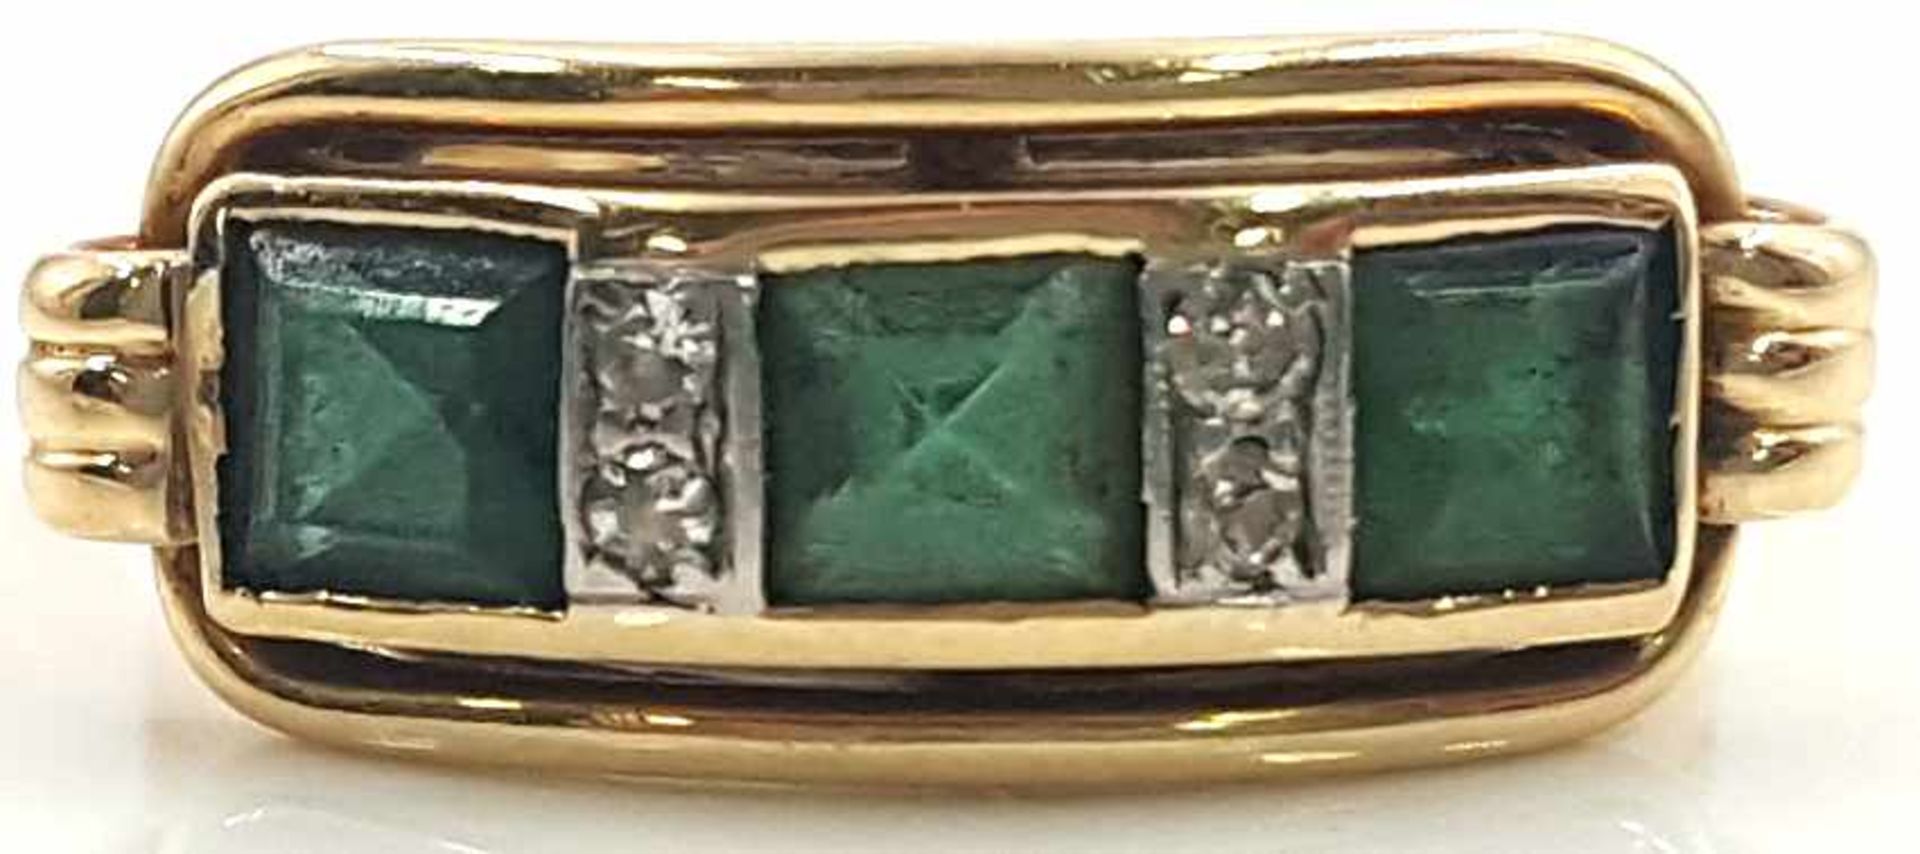 Ring, yellow gold 585, et al. With 3 green gemstones.